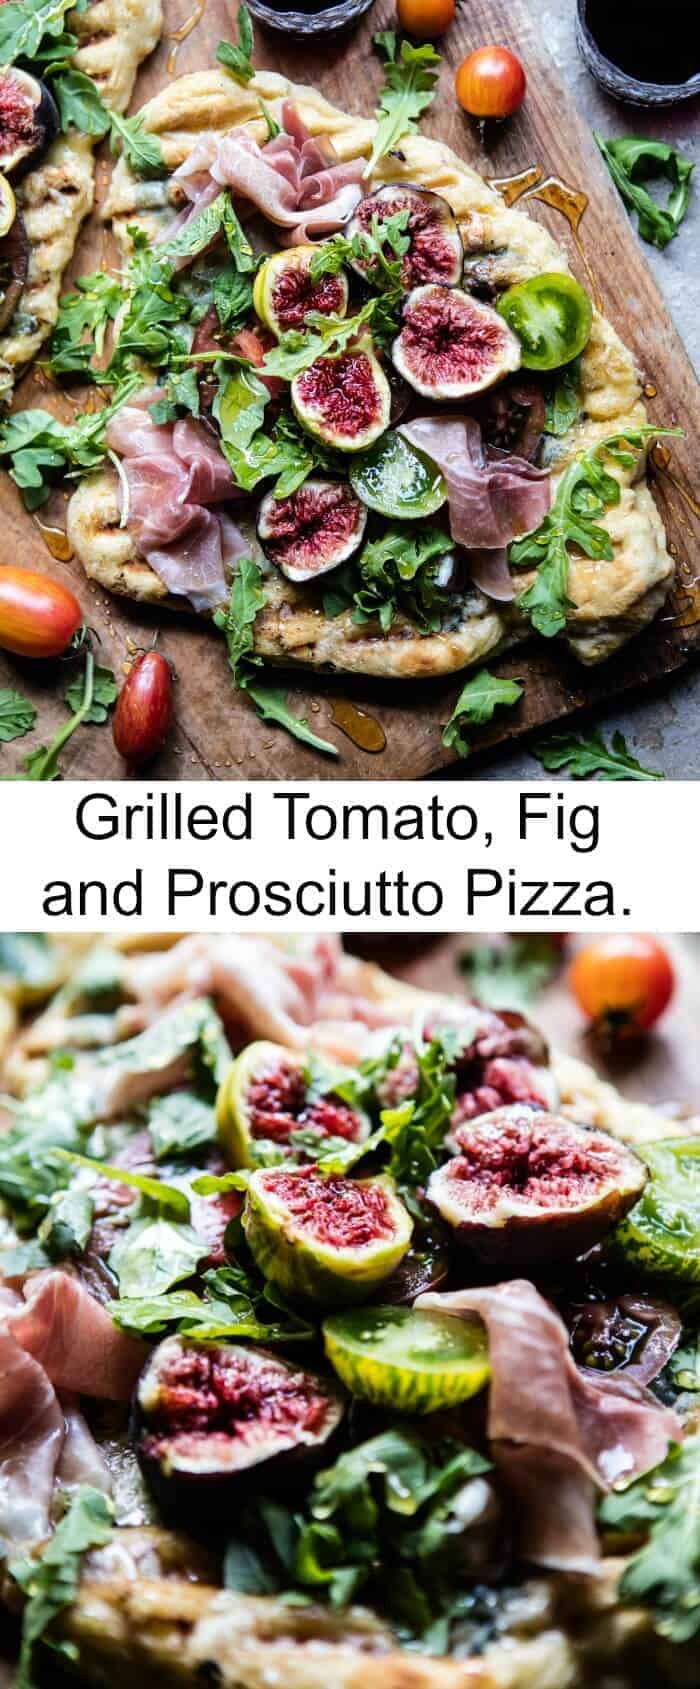 Grilled Tomato, Fig and Prosciutto Pizza | halfbakedharvest.com @hbharvest